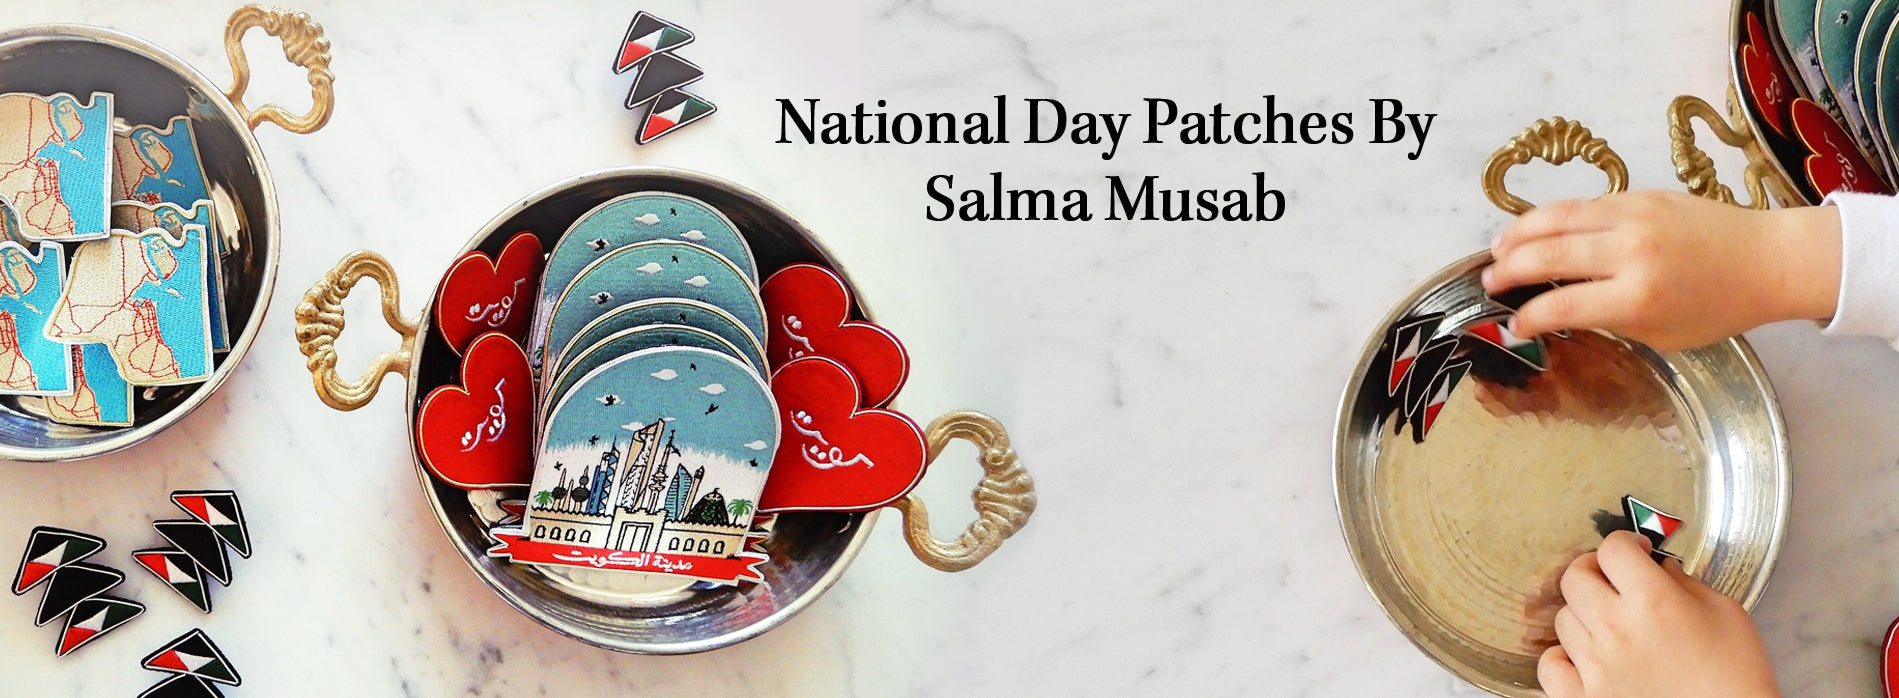 National Day Patches by Salma Musab